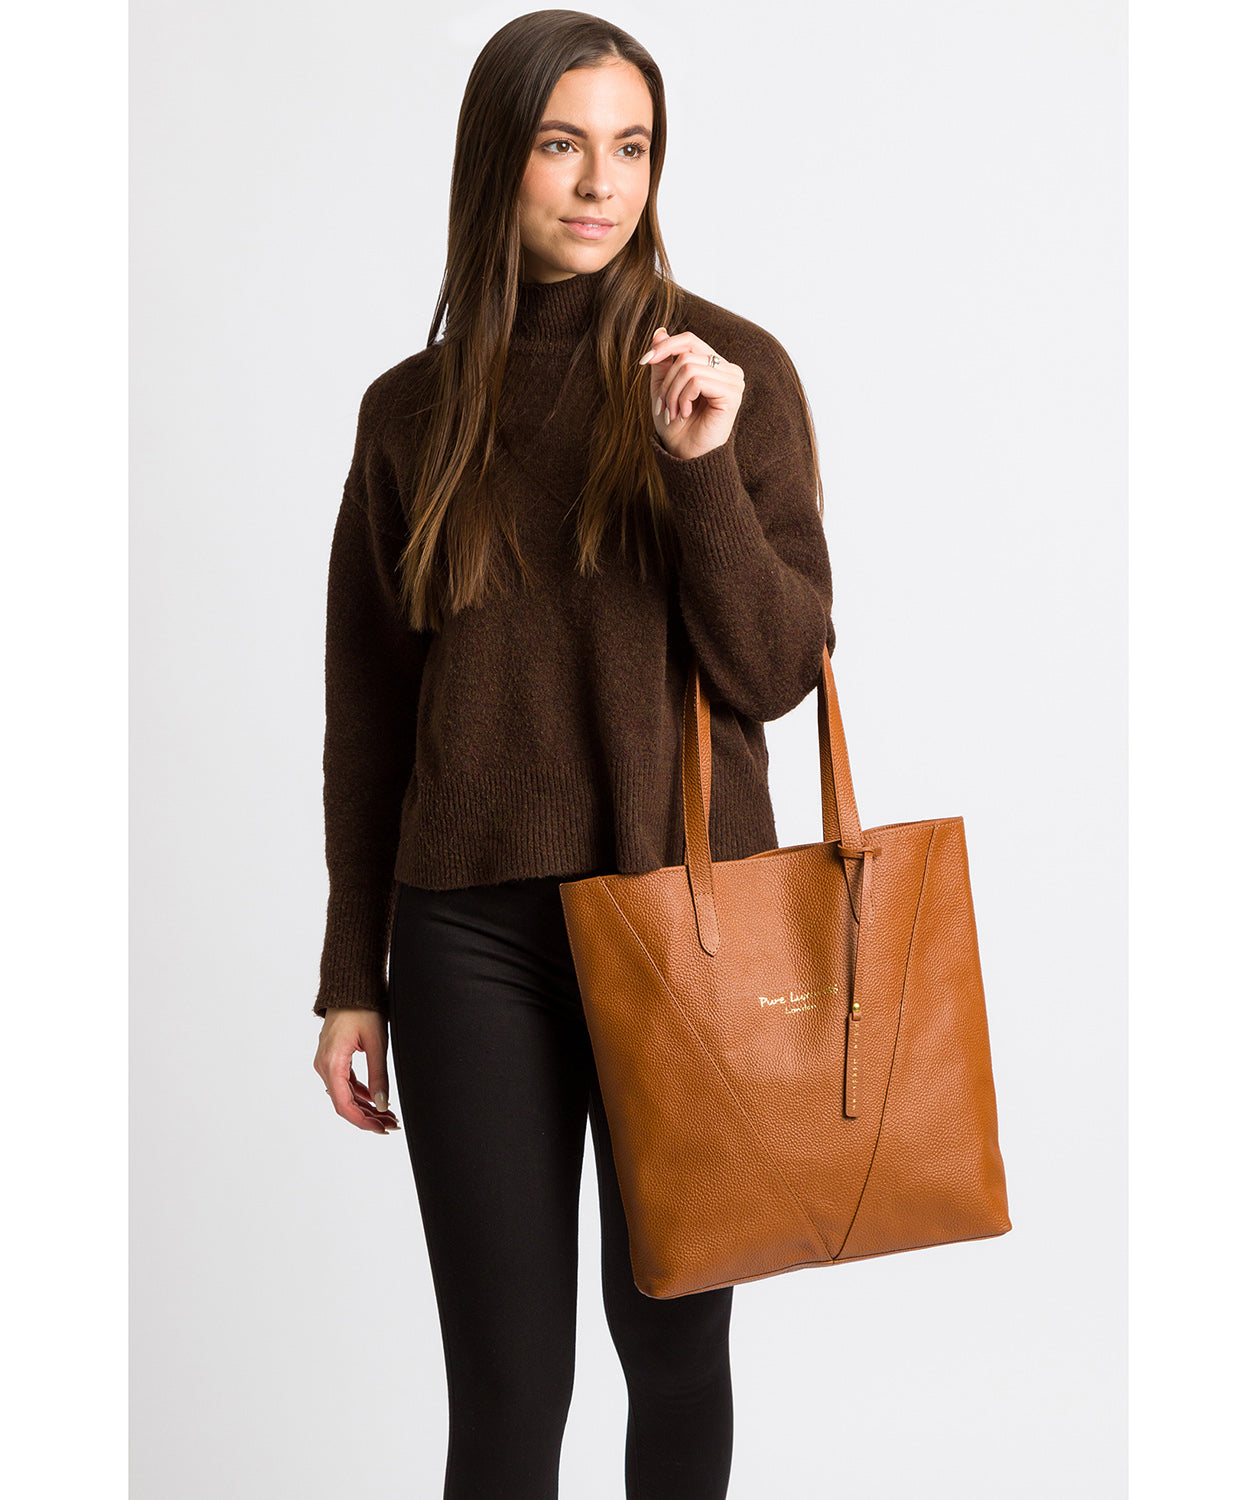 Tan Leather Tote Bag 'Claudia' by Pure Luxuries – Pure Luxuries London